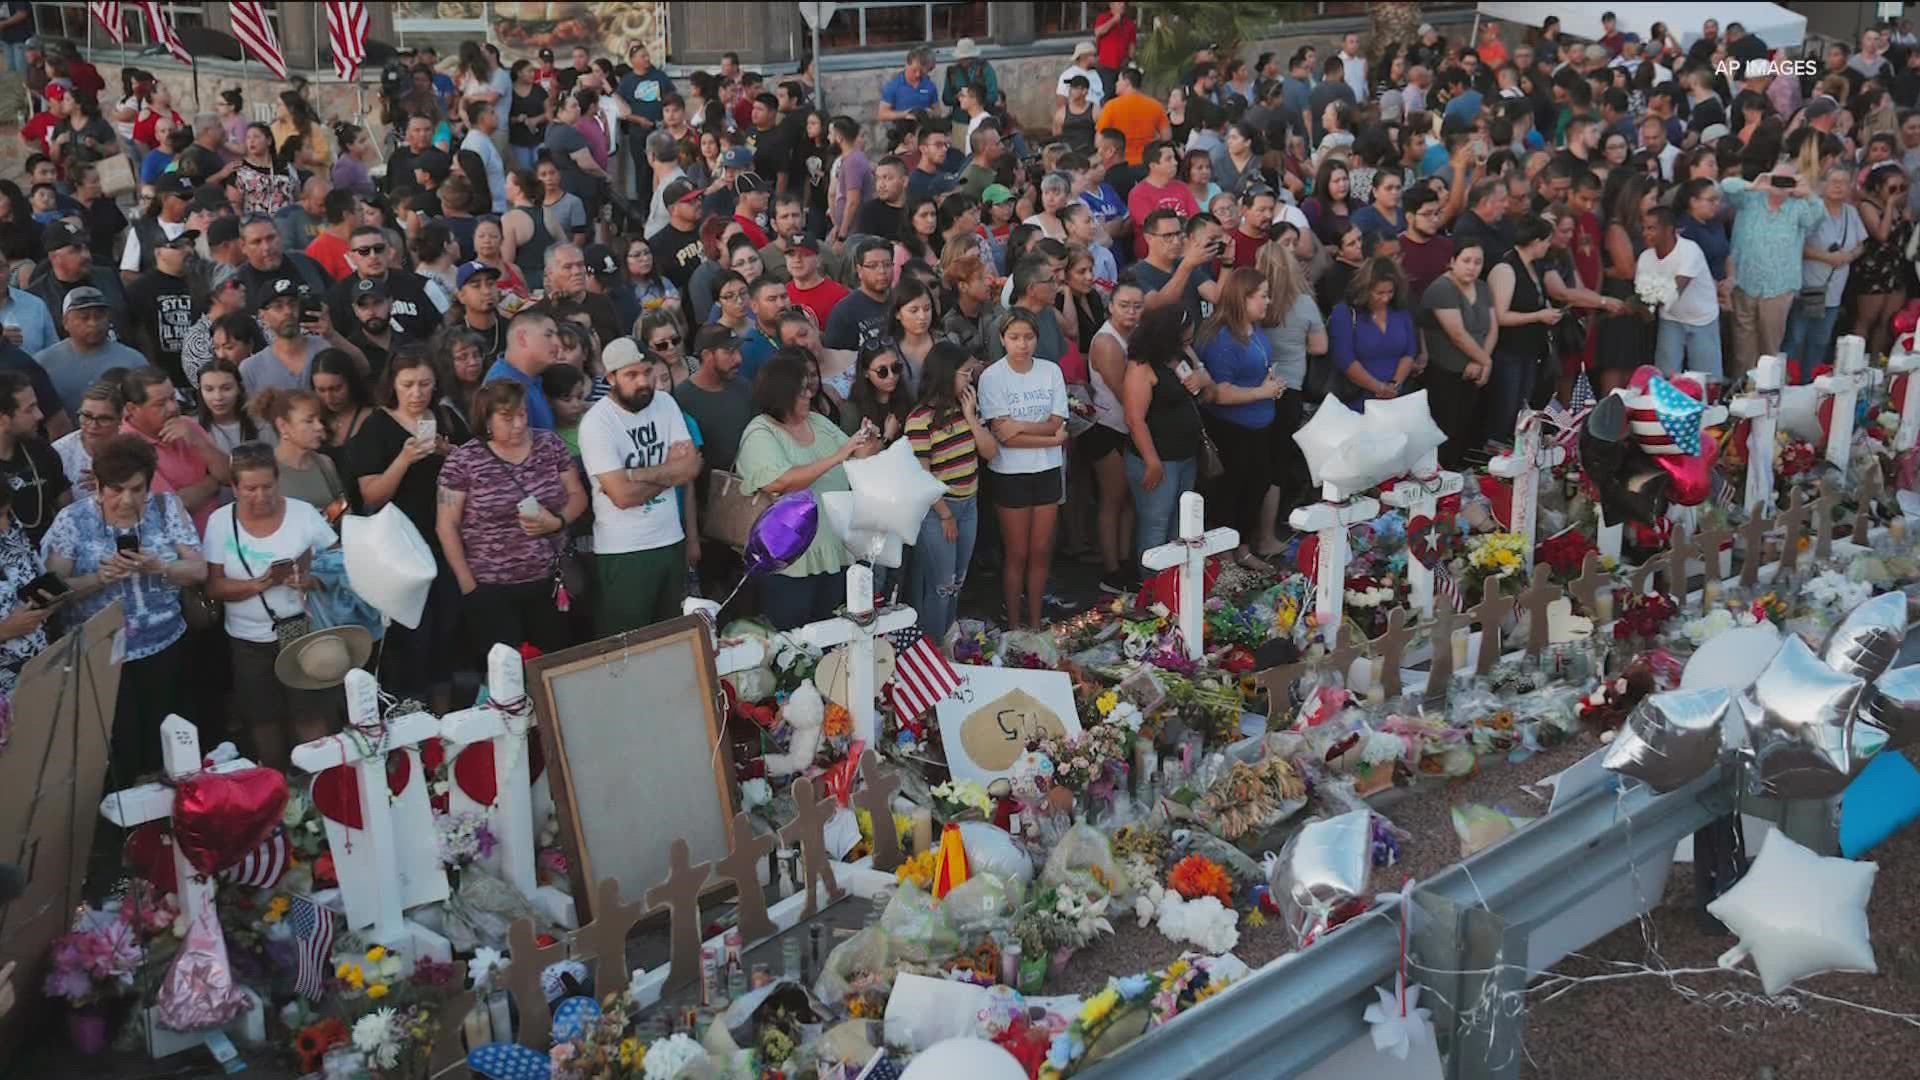 Federal prosecutors won't seek the death penalty for the shooter in the 2019 incident at an El Paso Walmart.